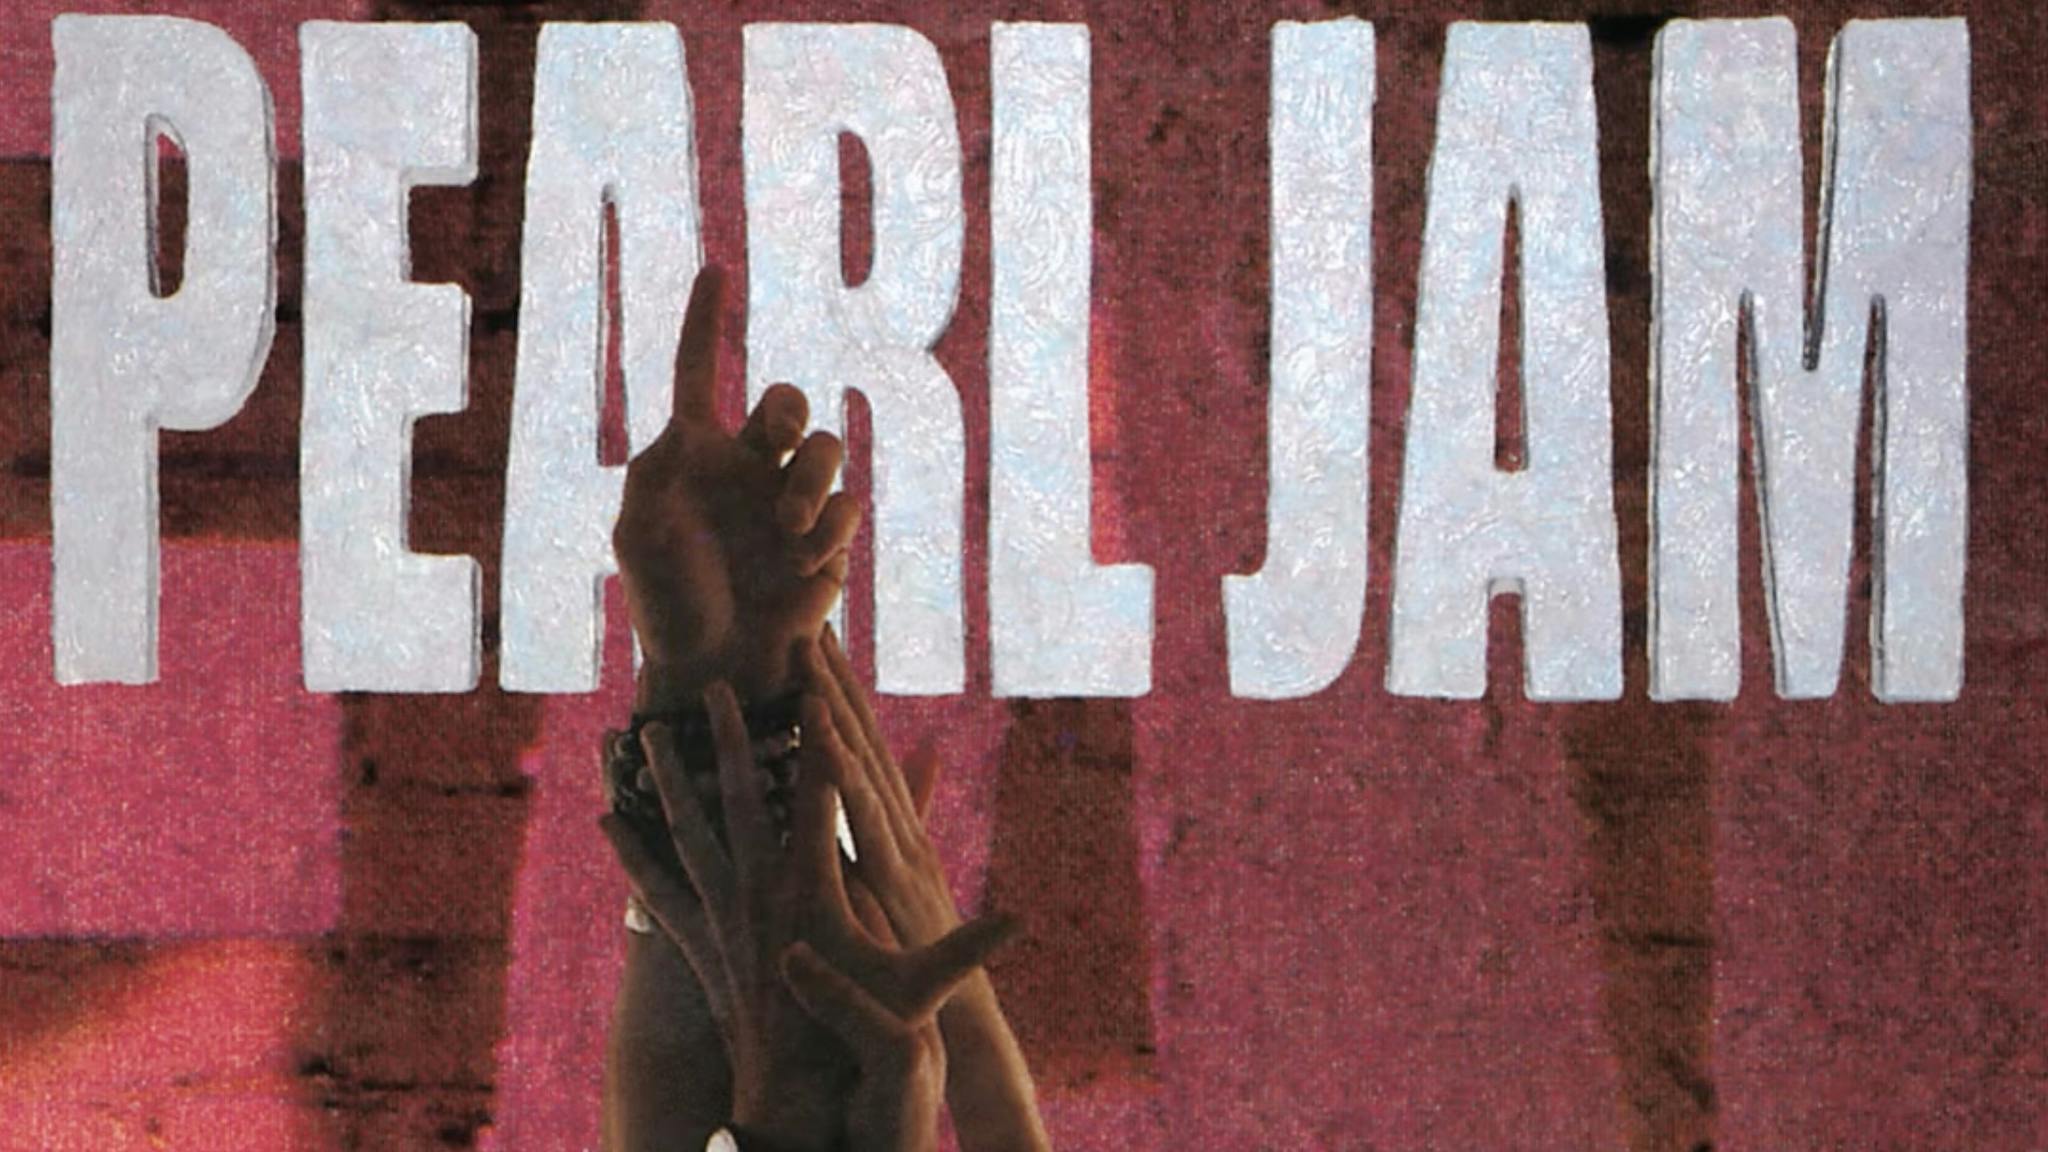 “It promises many great things”: Our original review of Pearl Jam’s legendary debut Ten